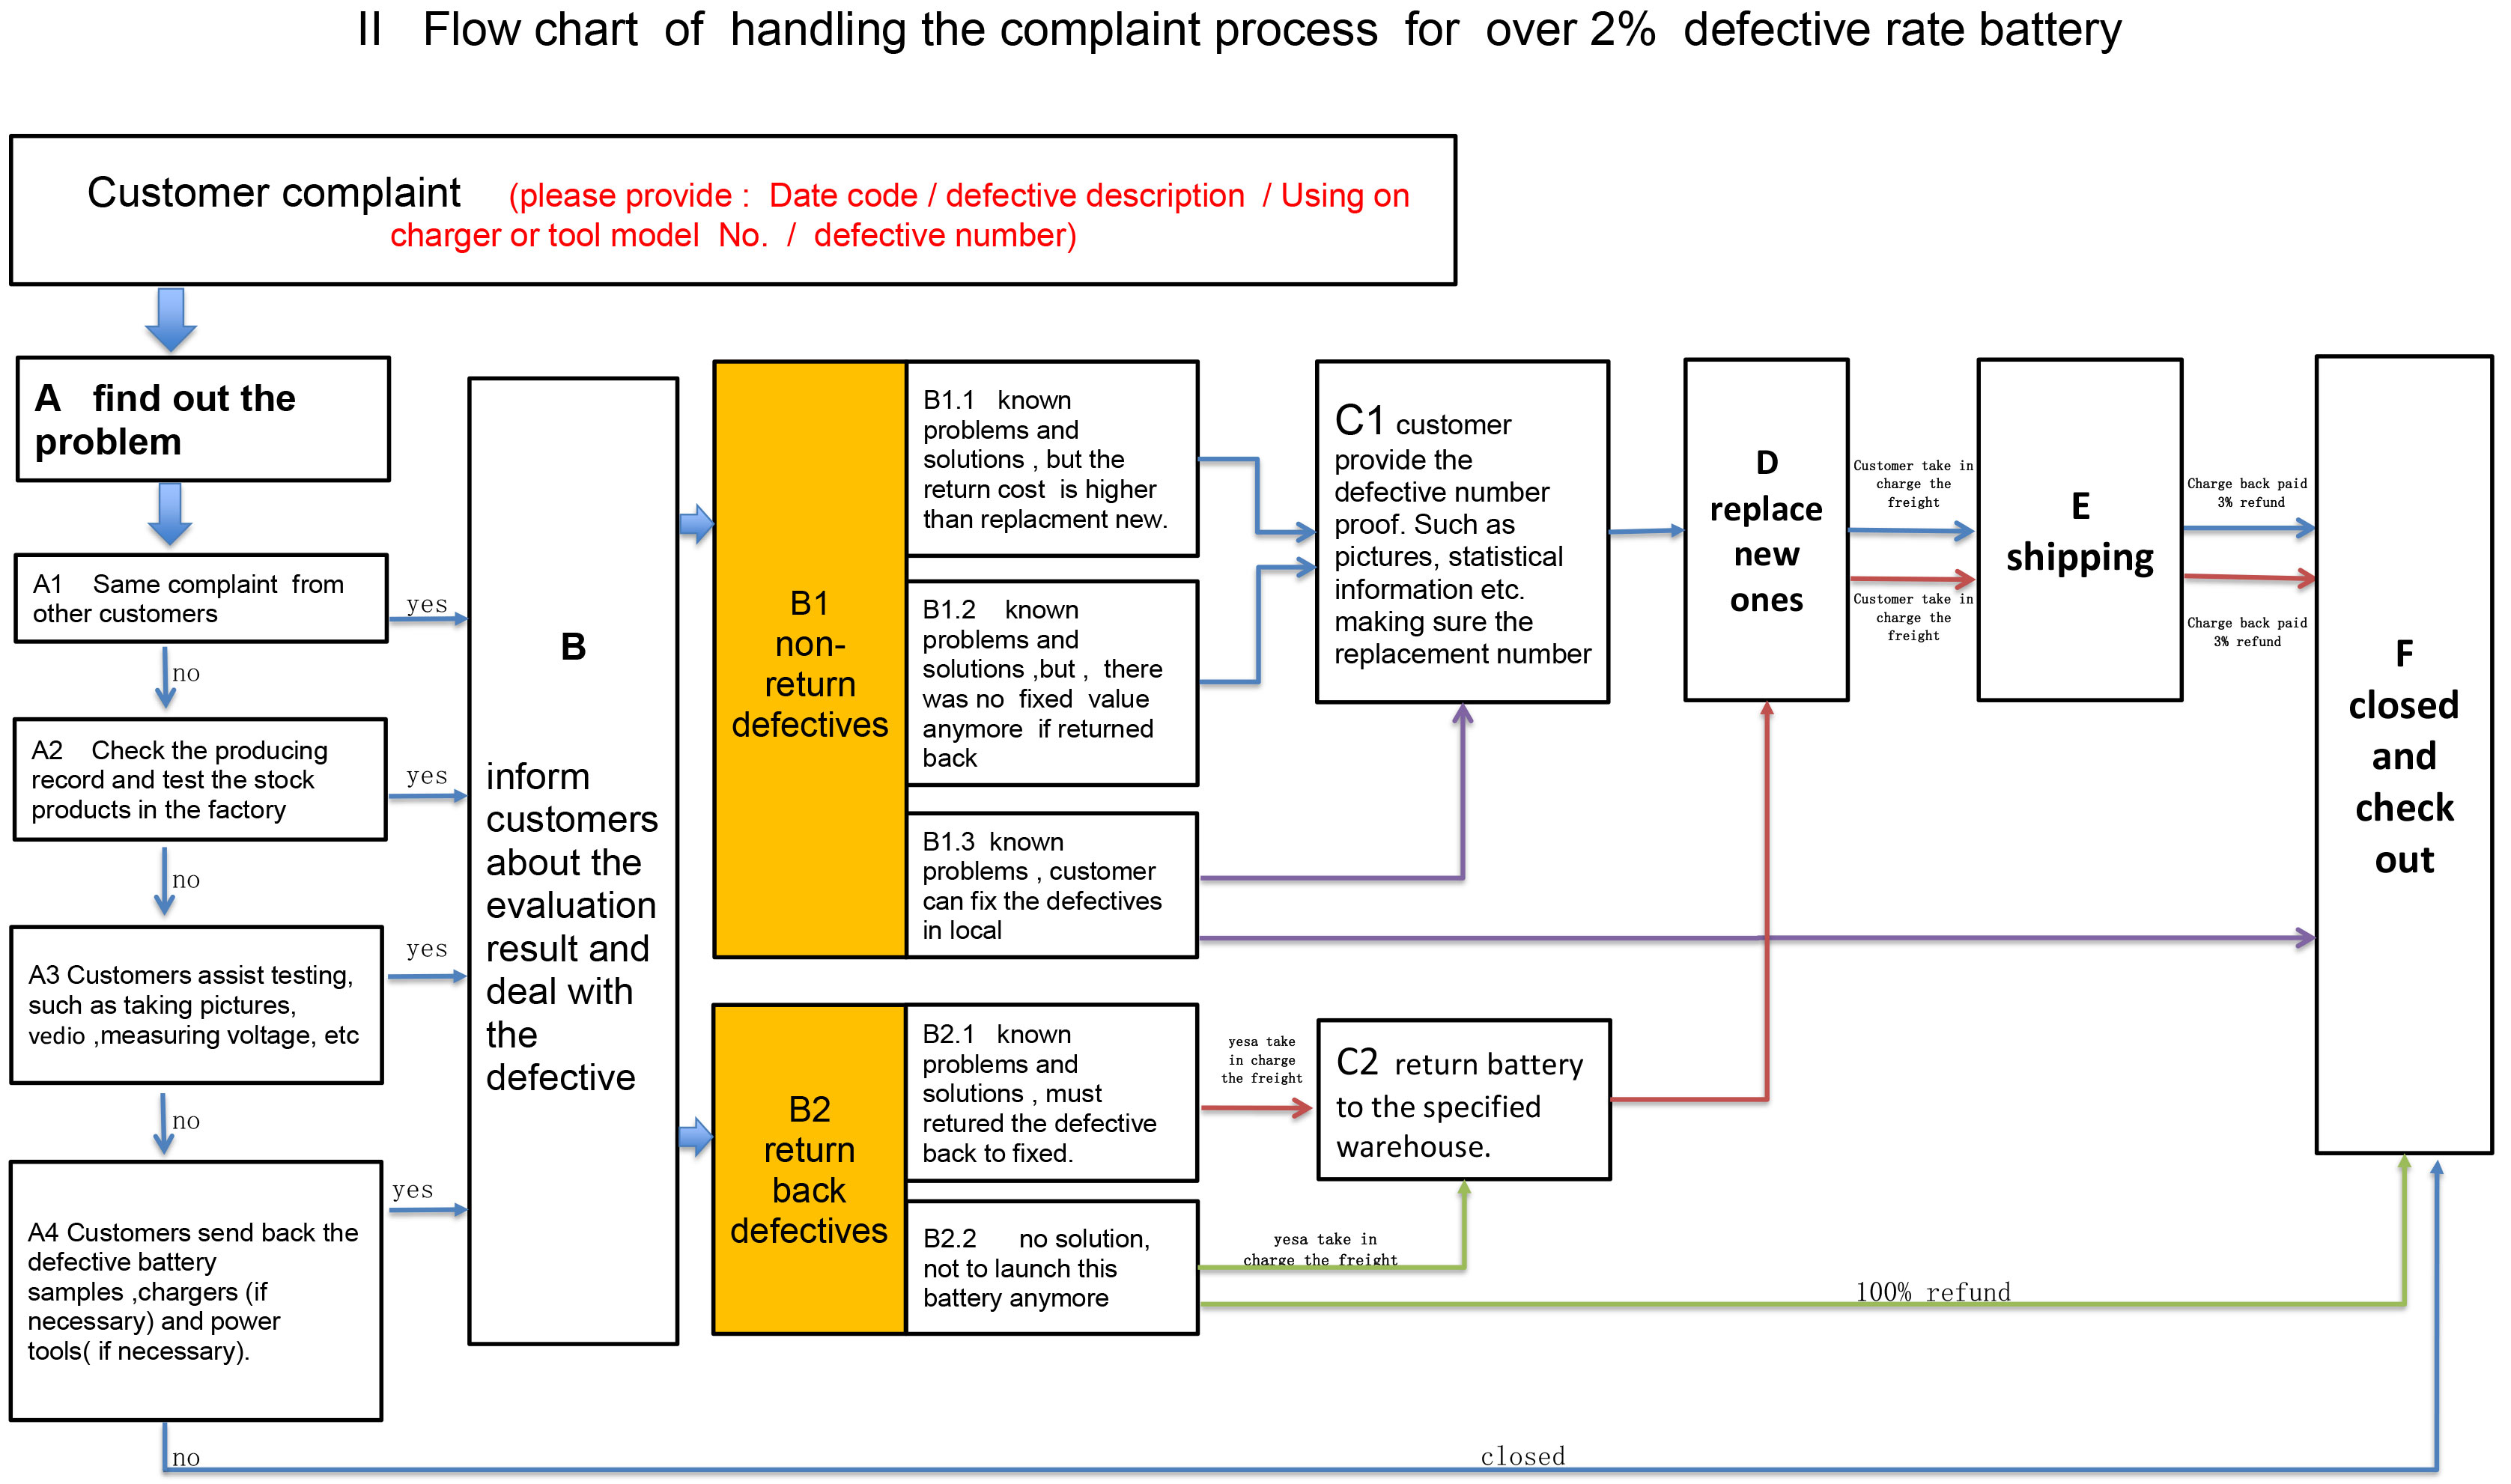 Flow chart of handling the complaint process for over 2% defective rate battery 